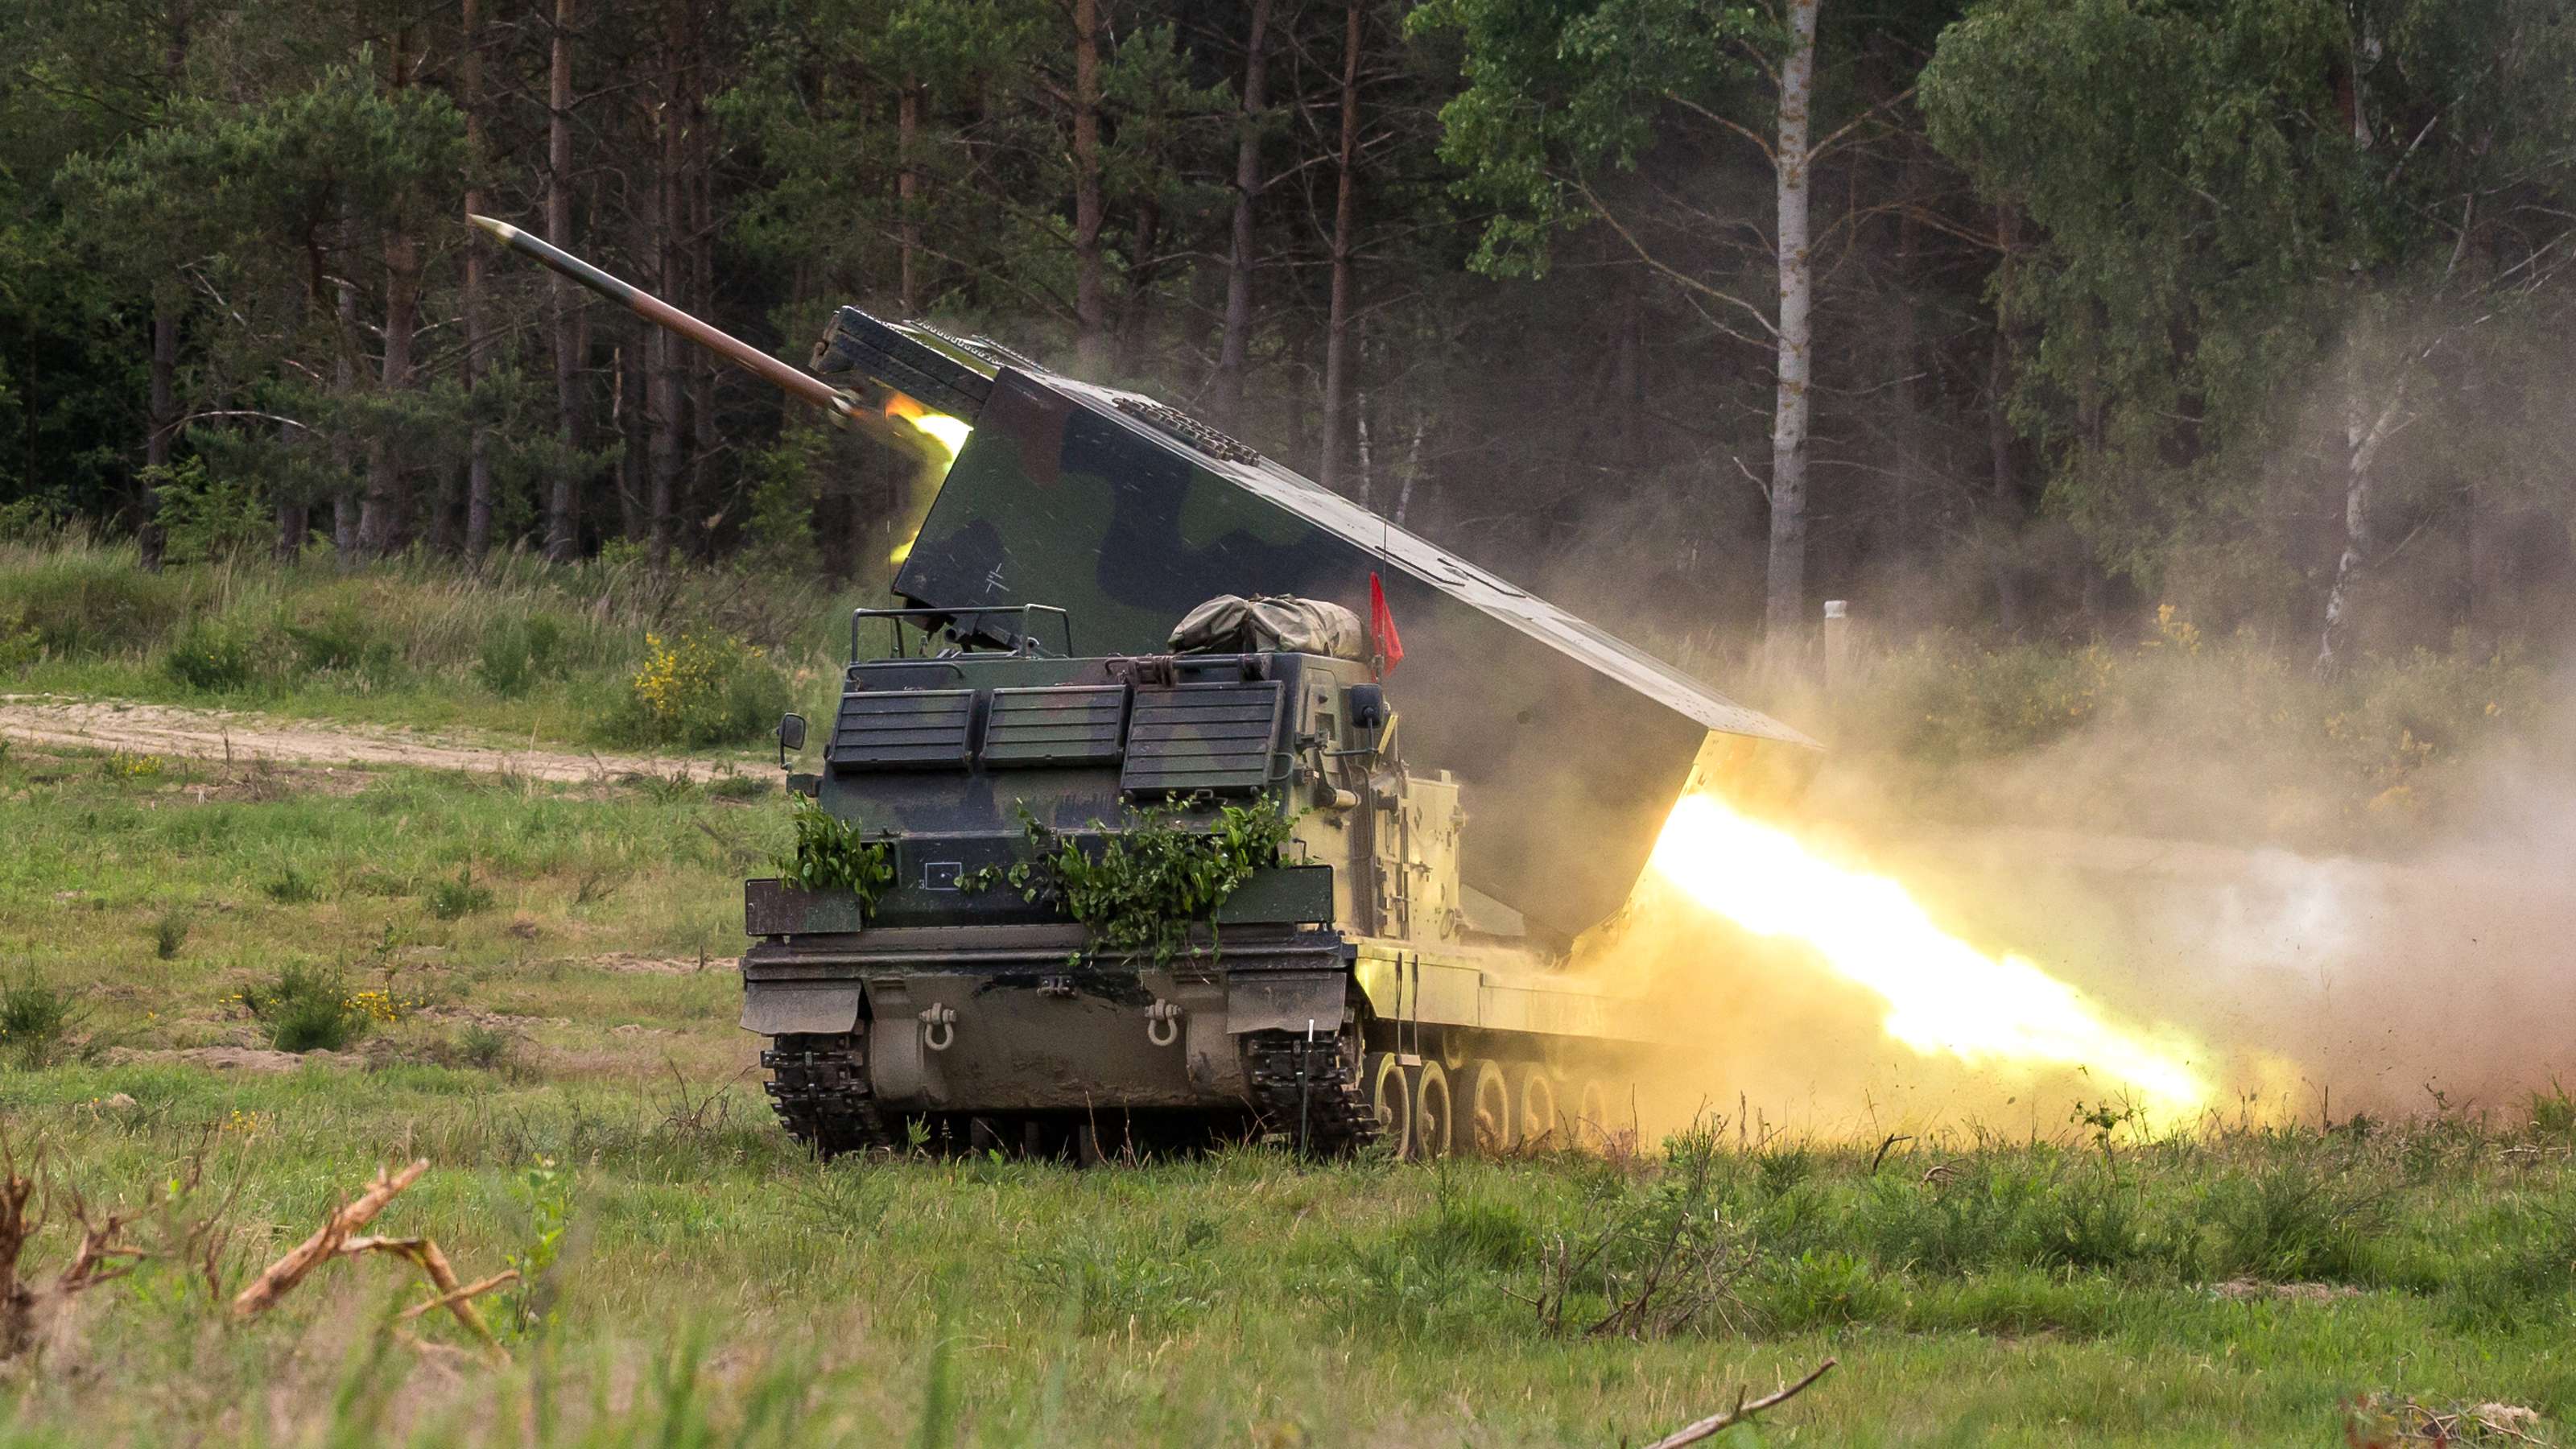 Germany began to train Ukrainian crews to control the MARS II - this is the European analogue of the M270 MLRS with a maximum firing range of 70 km